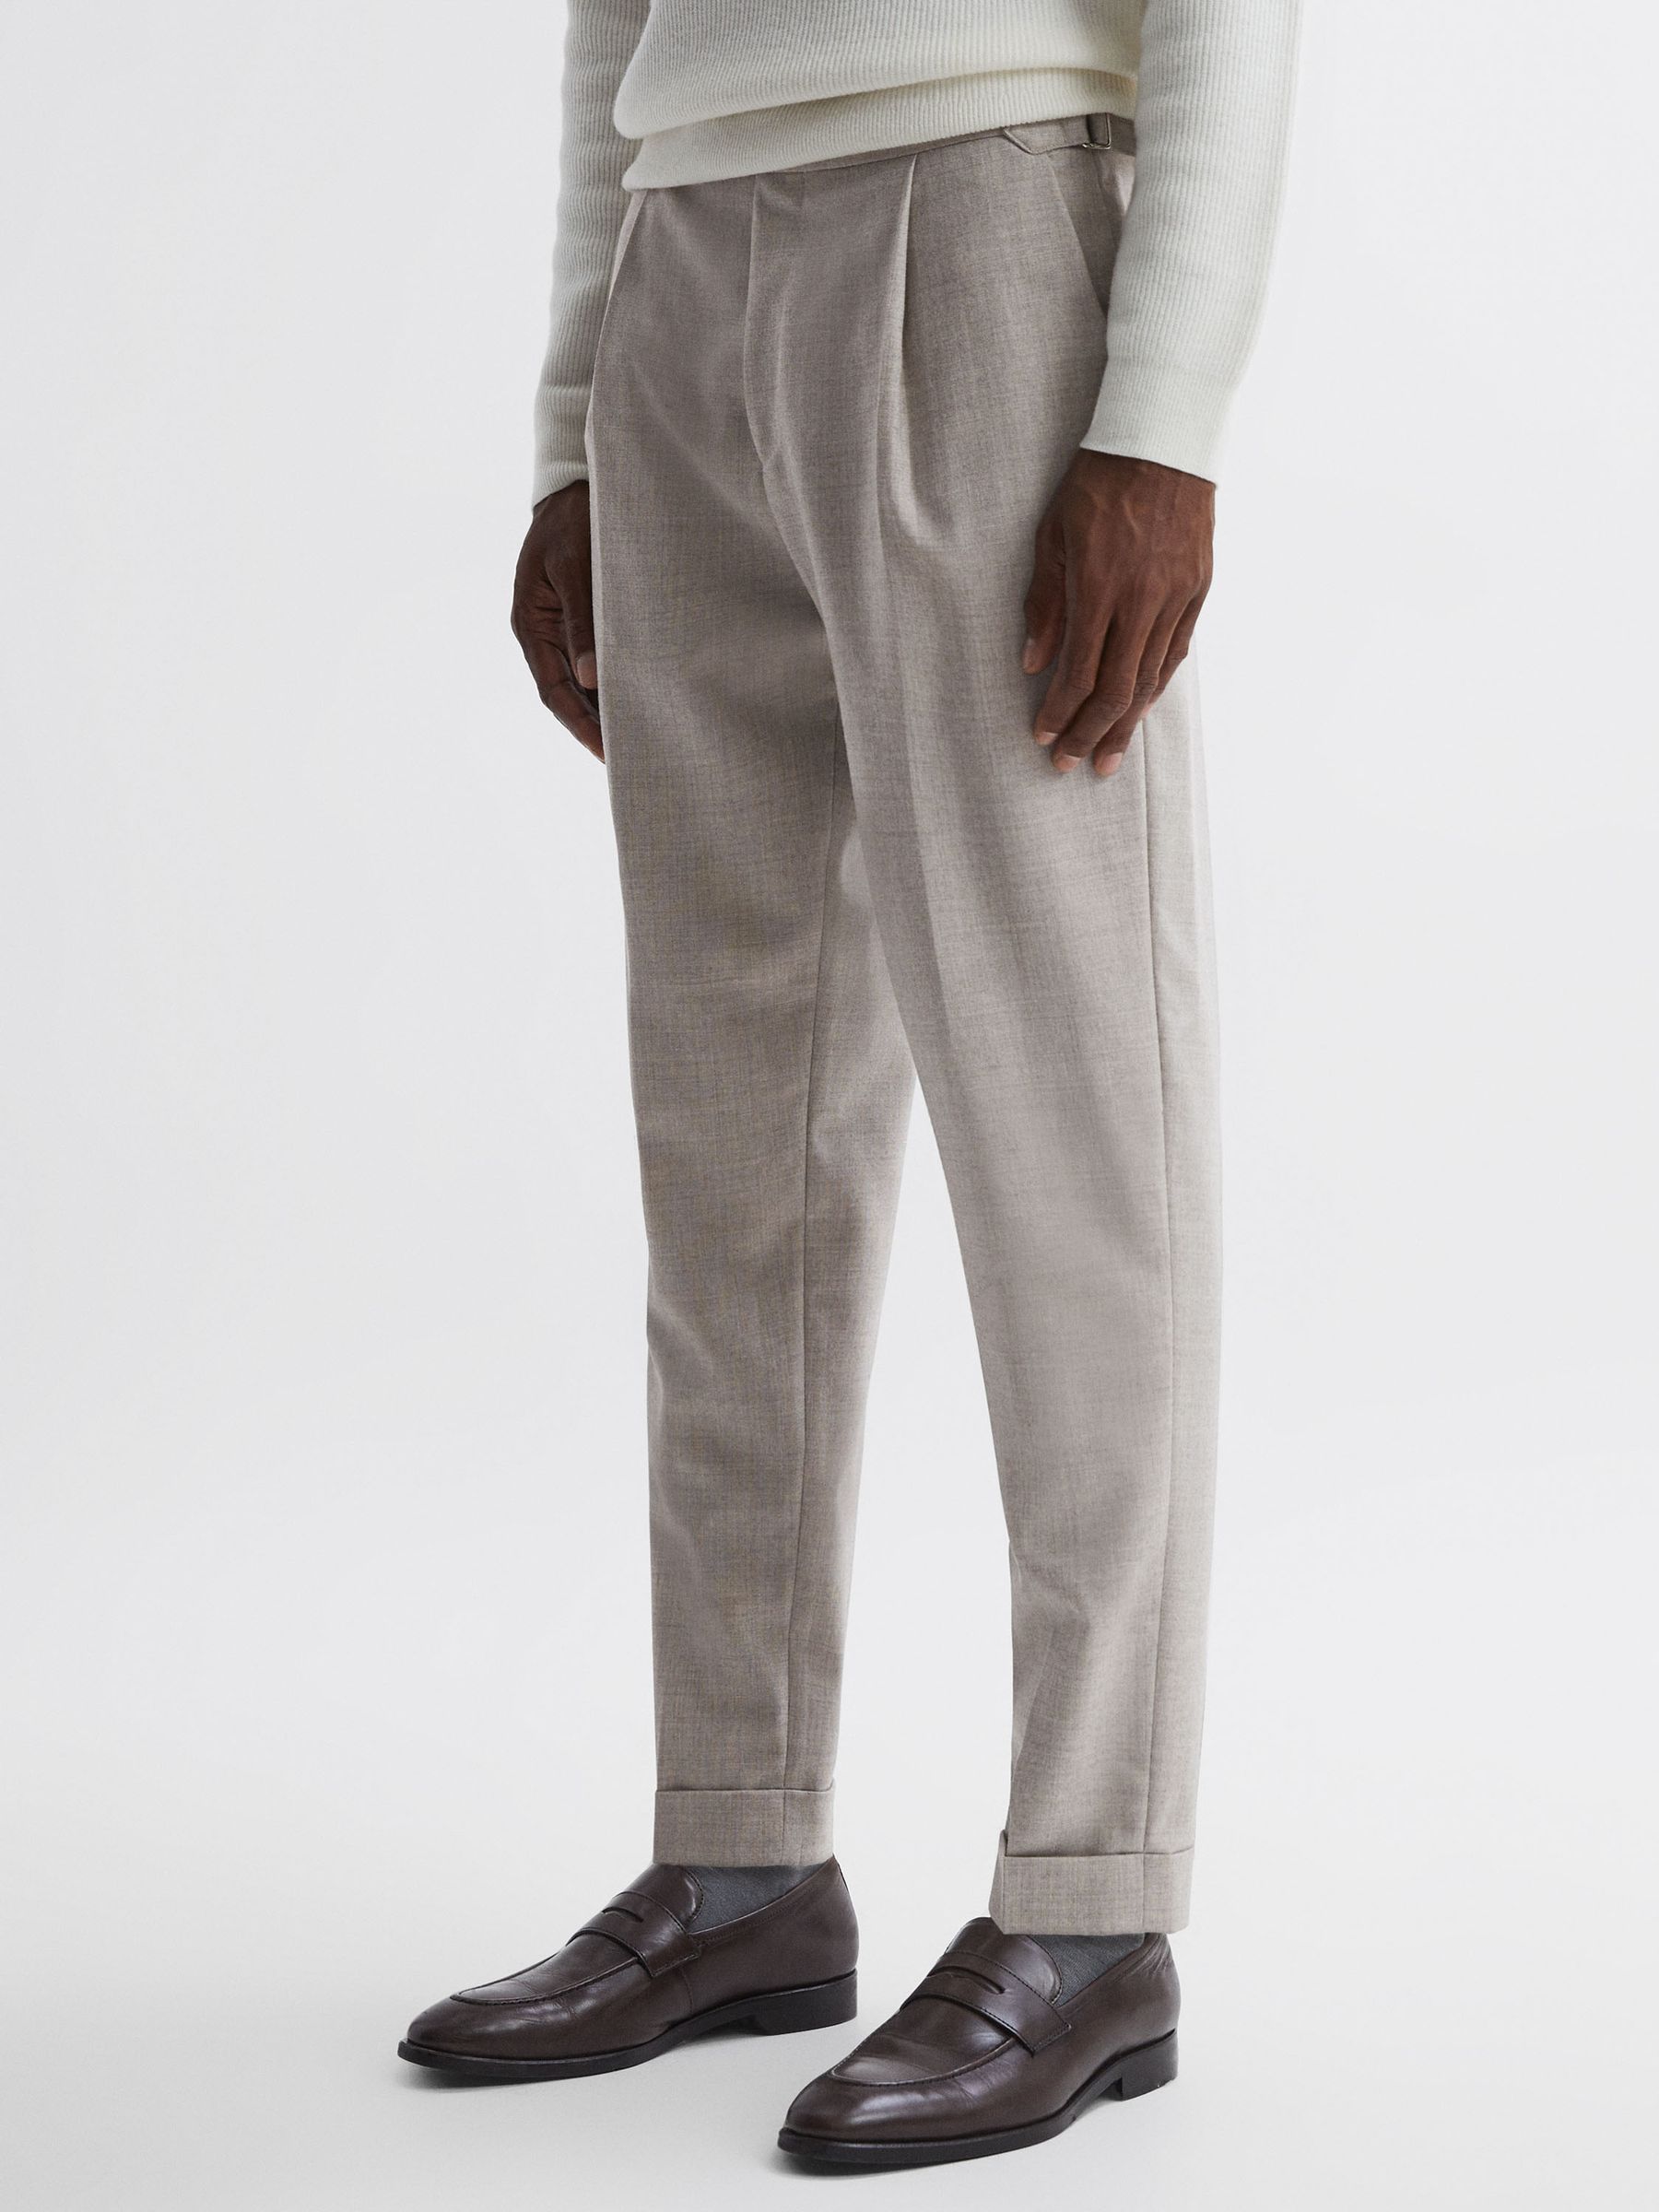 Reiss Beadnell Slim Fit Brushed Wool Trousers | REISS USA